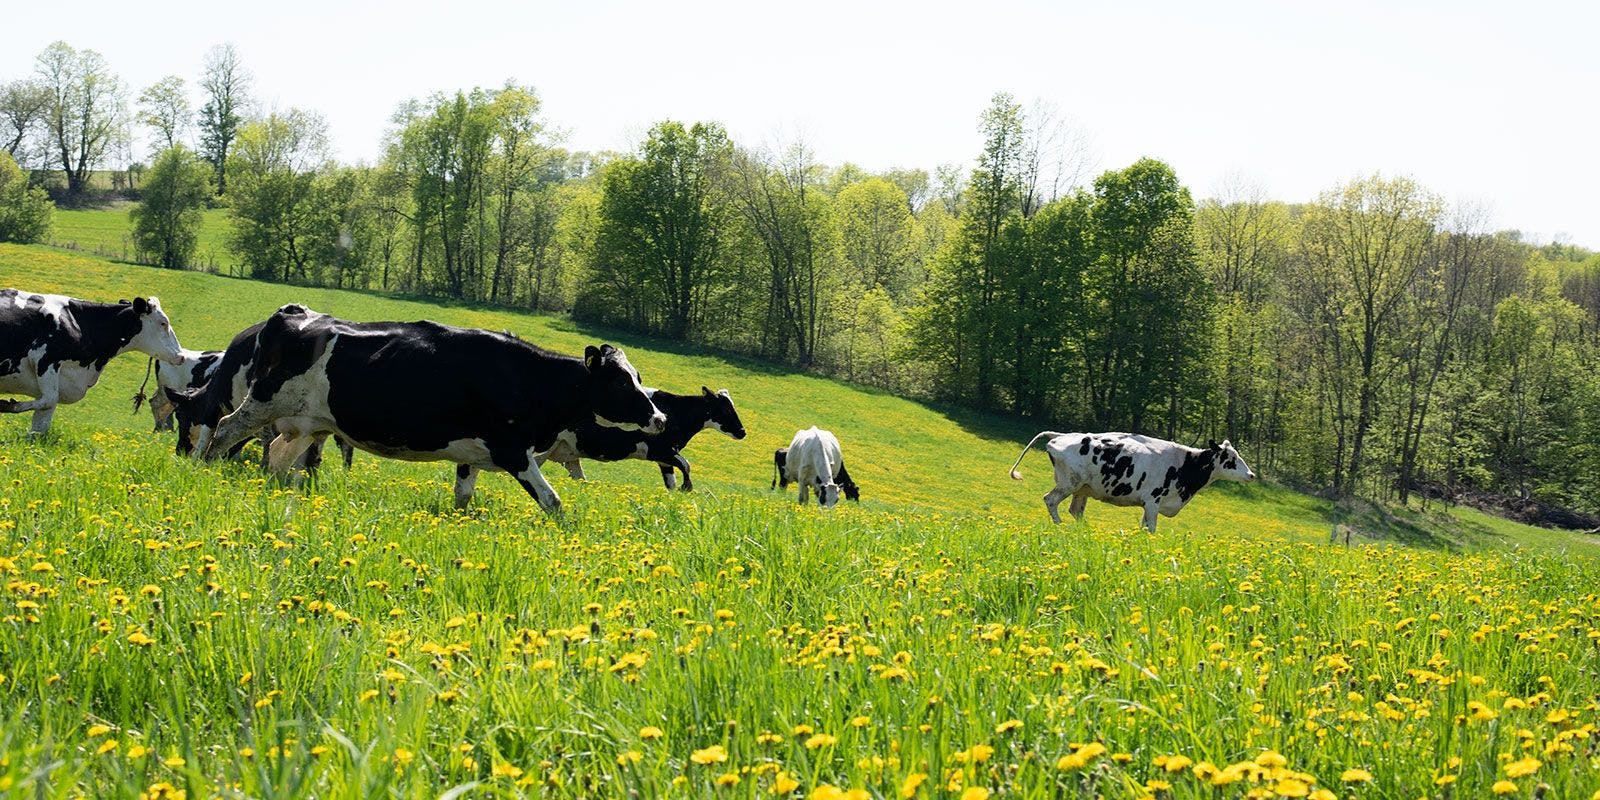 Happy cows prance through a green pasture speckled with yellow flowers.